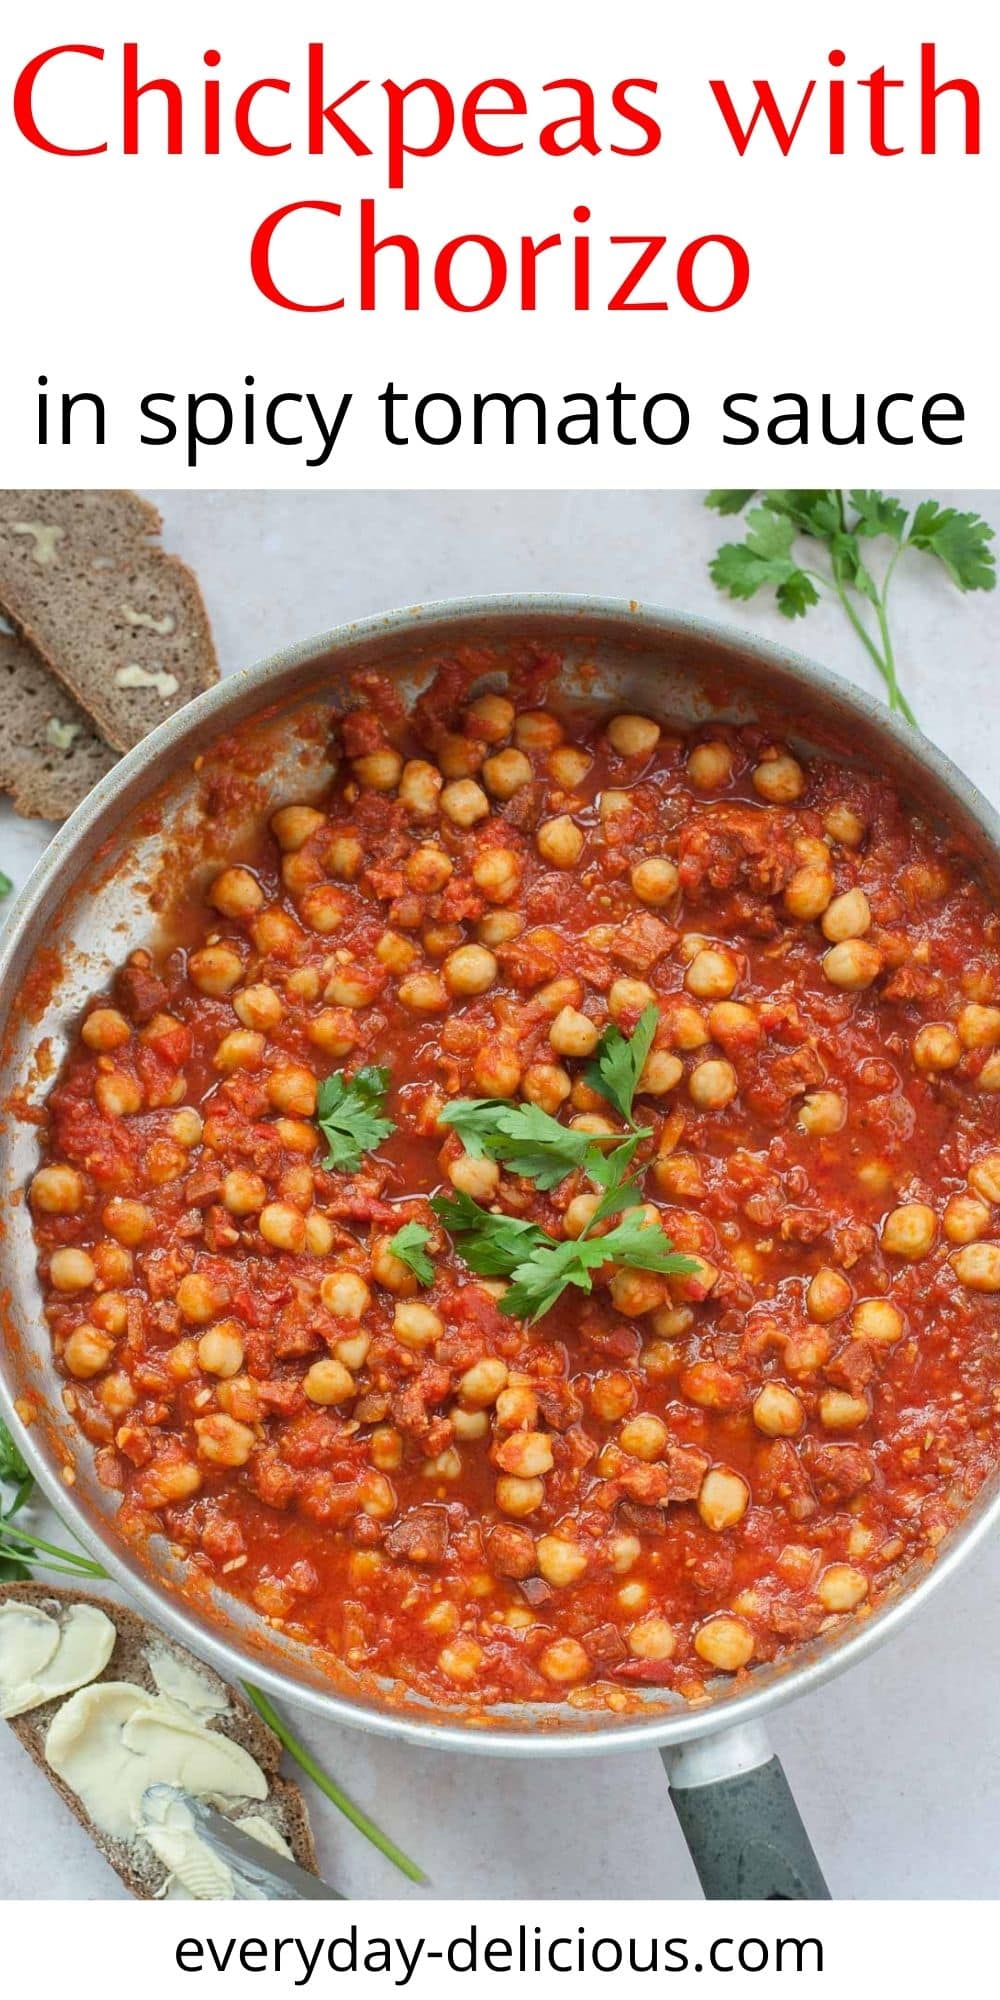 Chickpeas with chorizo in spicy tomato sauce - Everyday Delicious